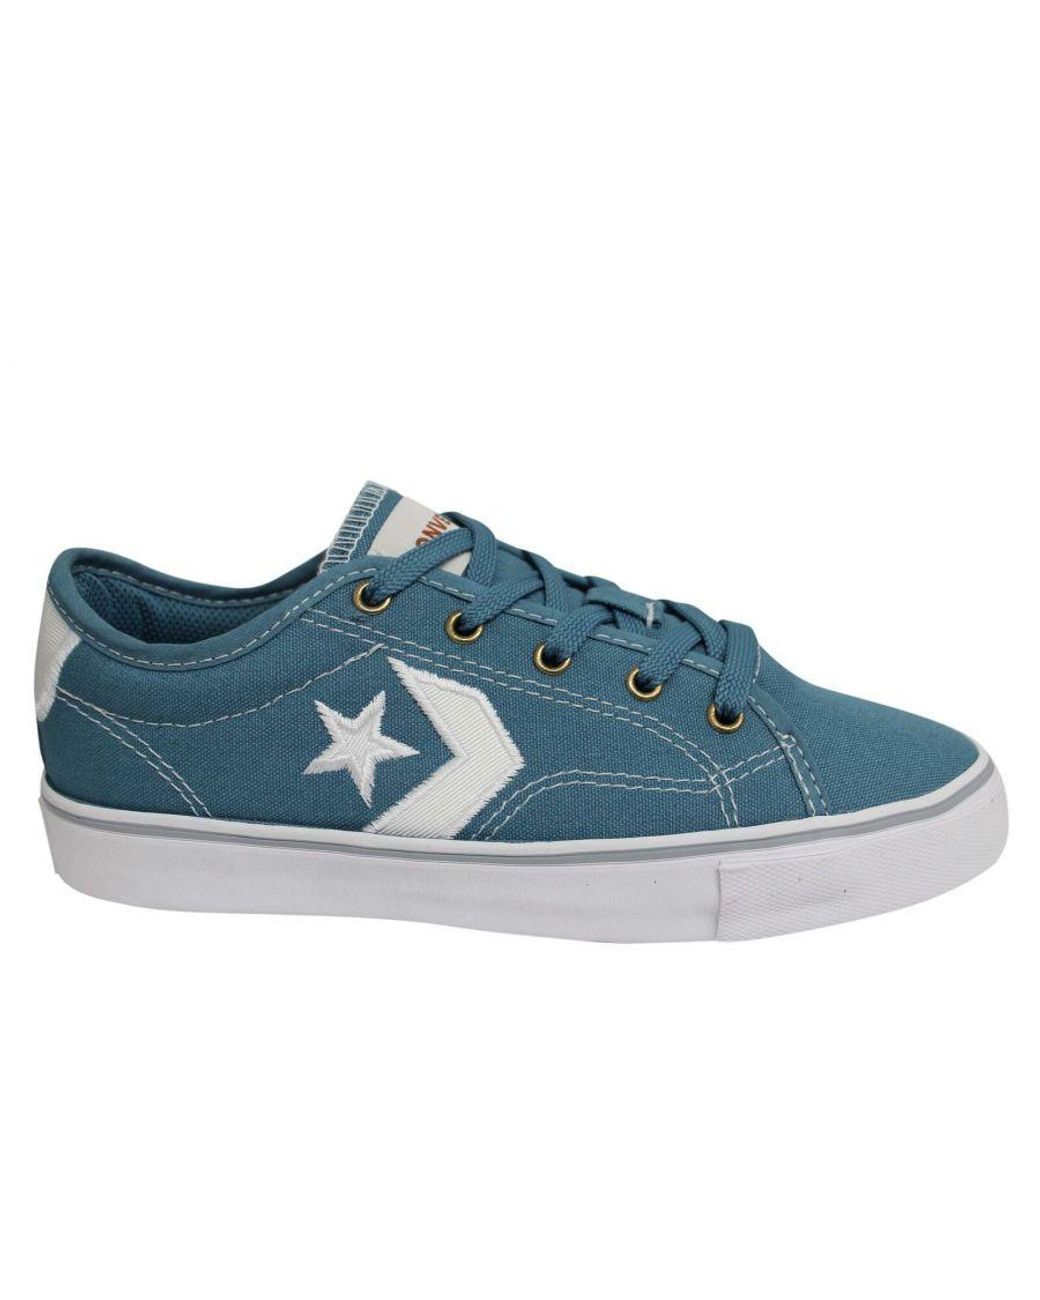 Converse Star Replay Ox Blue Textile Low Lace Up Trainers 565251c | Lyst UK